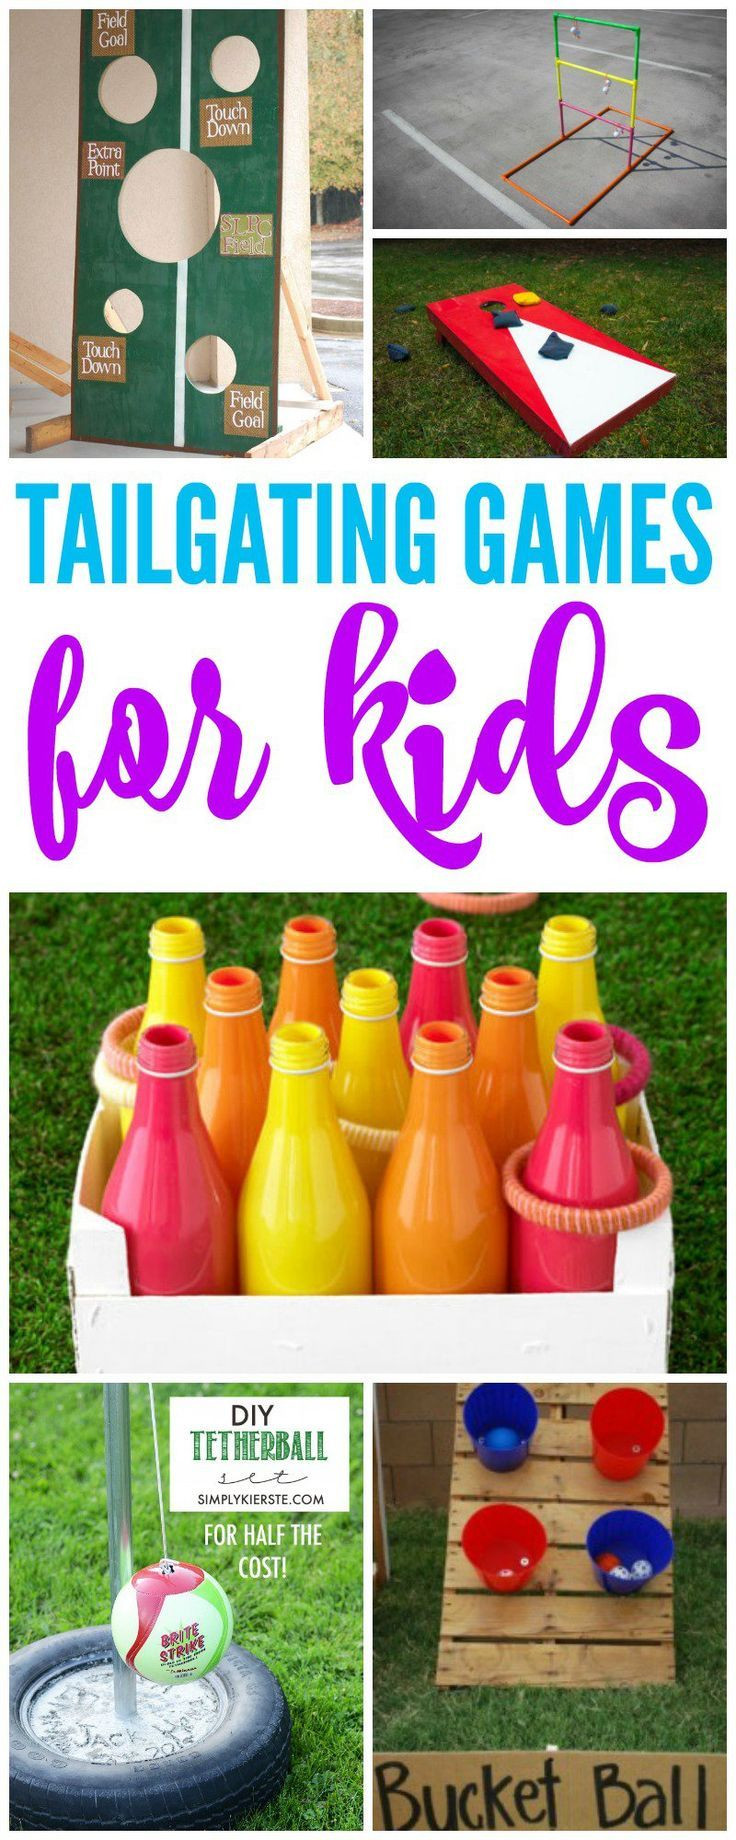 Football Party Ideas For Kids
 Tailgate Games for Kids or Adults Football Parties and